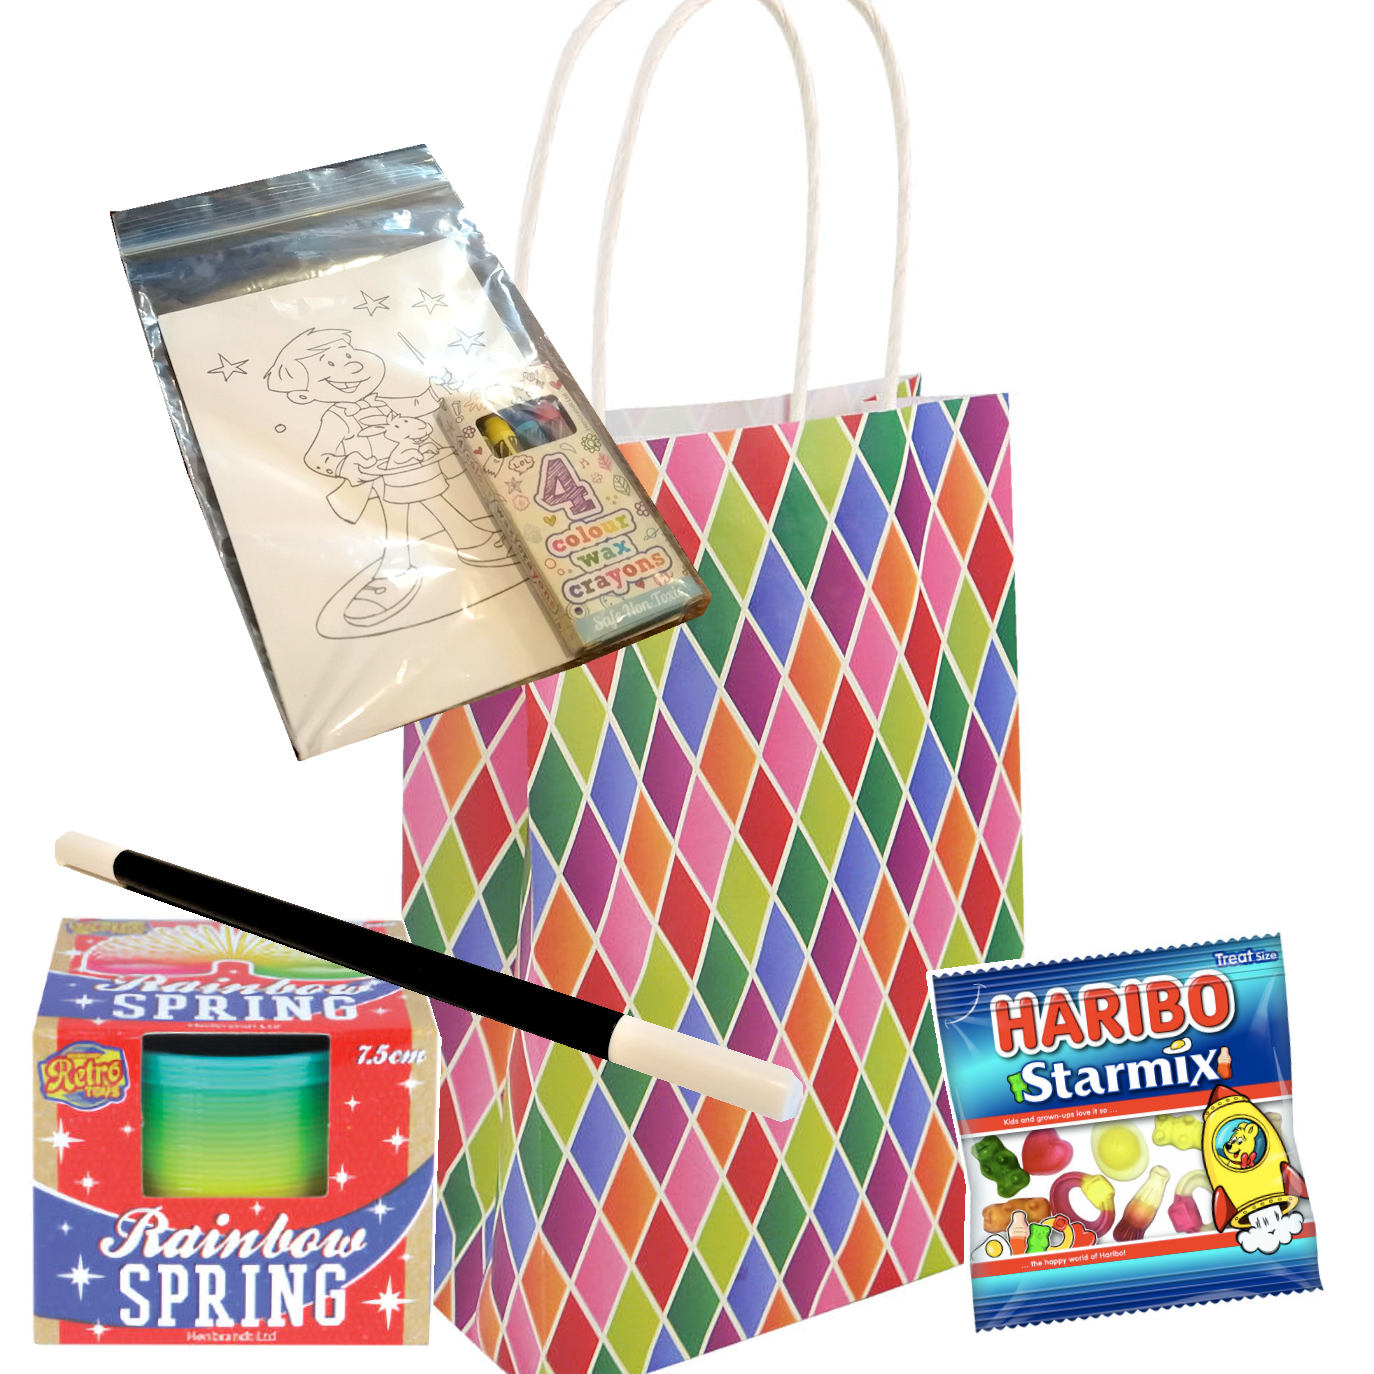 CUSTOMISE YOUR OWN PARTY BAGS